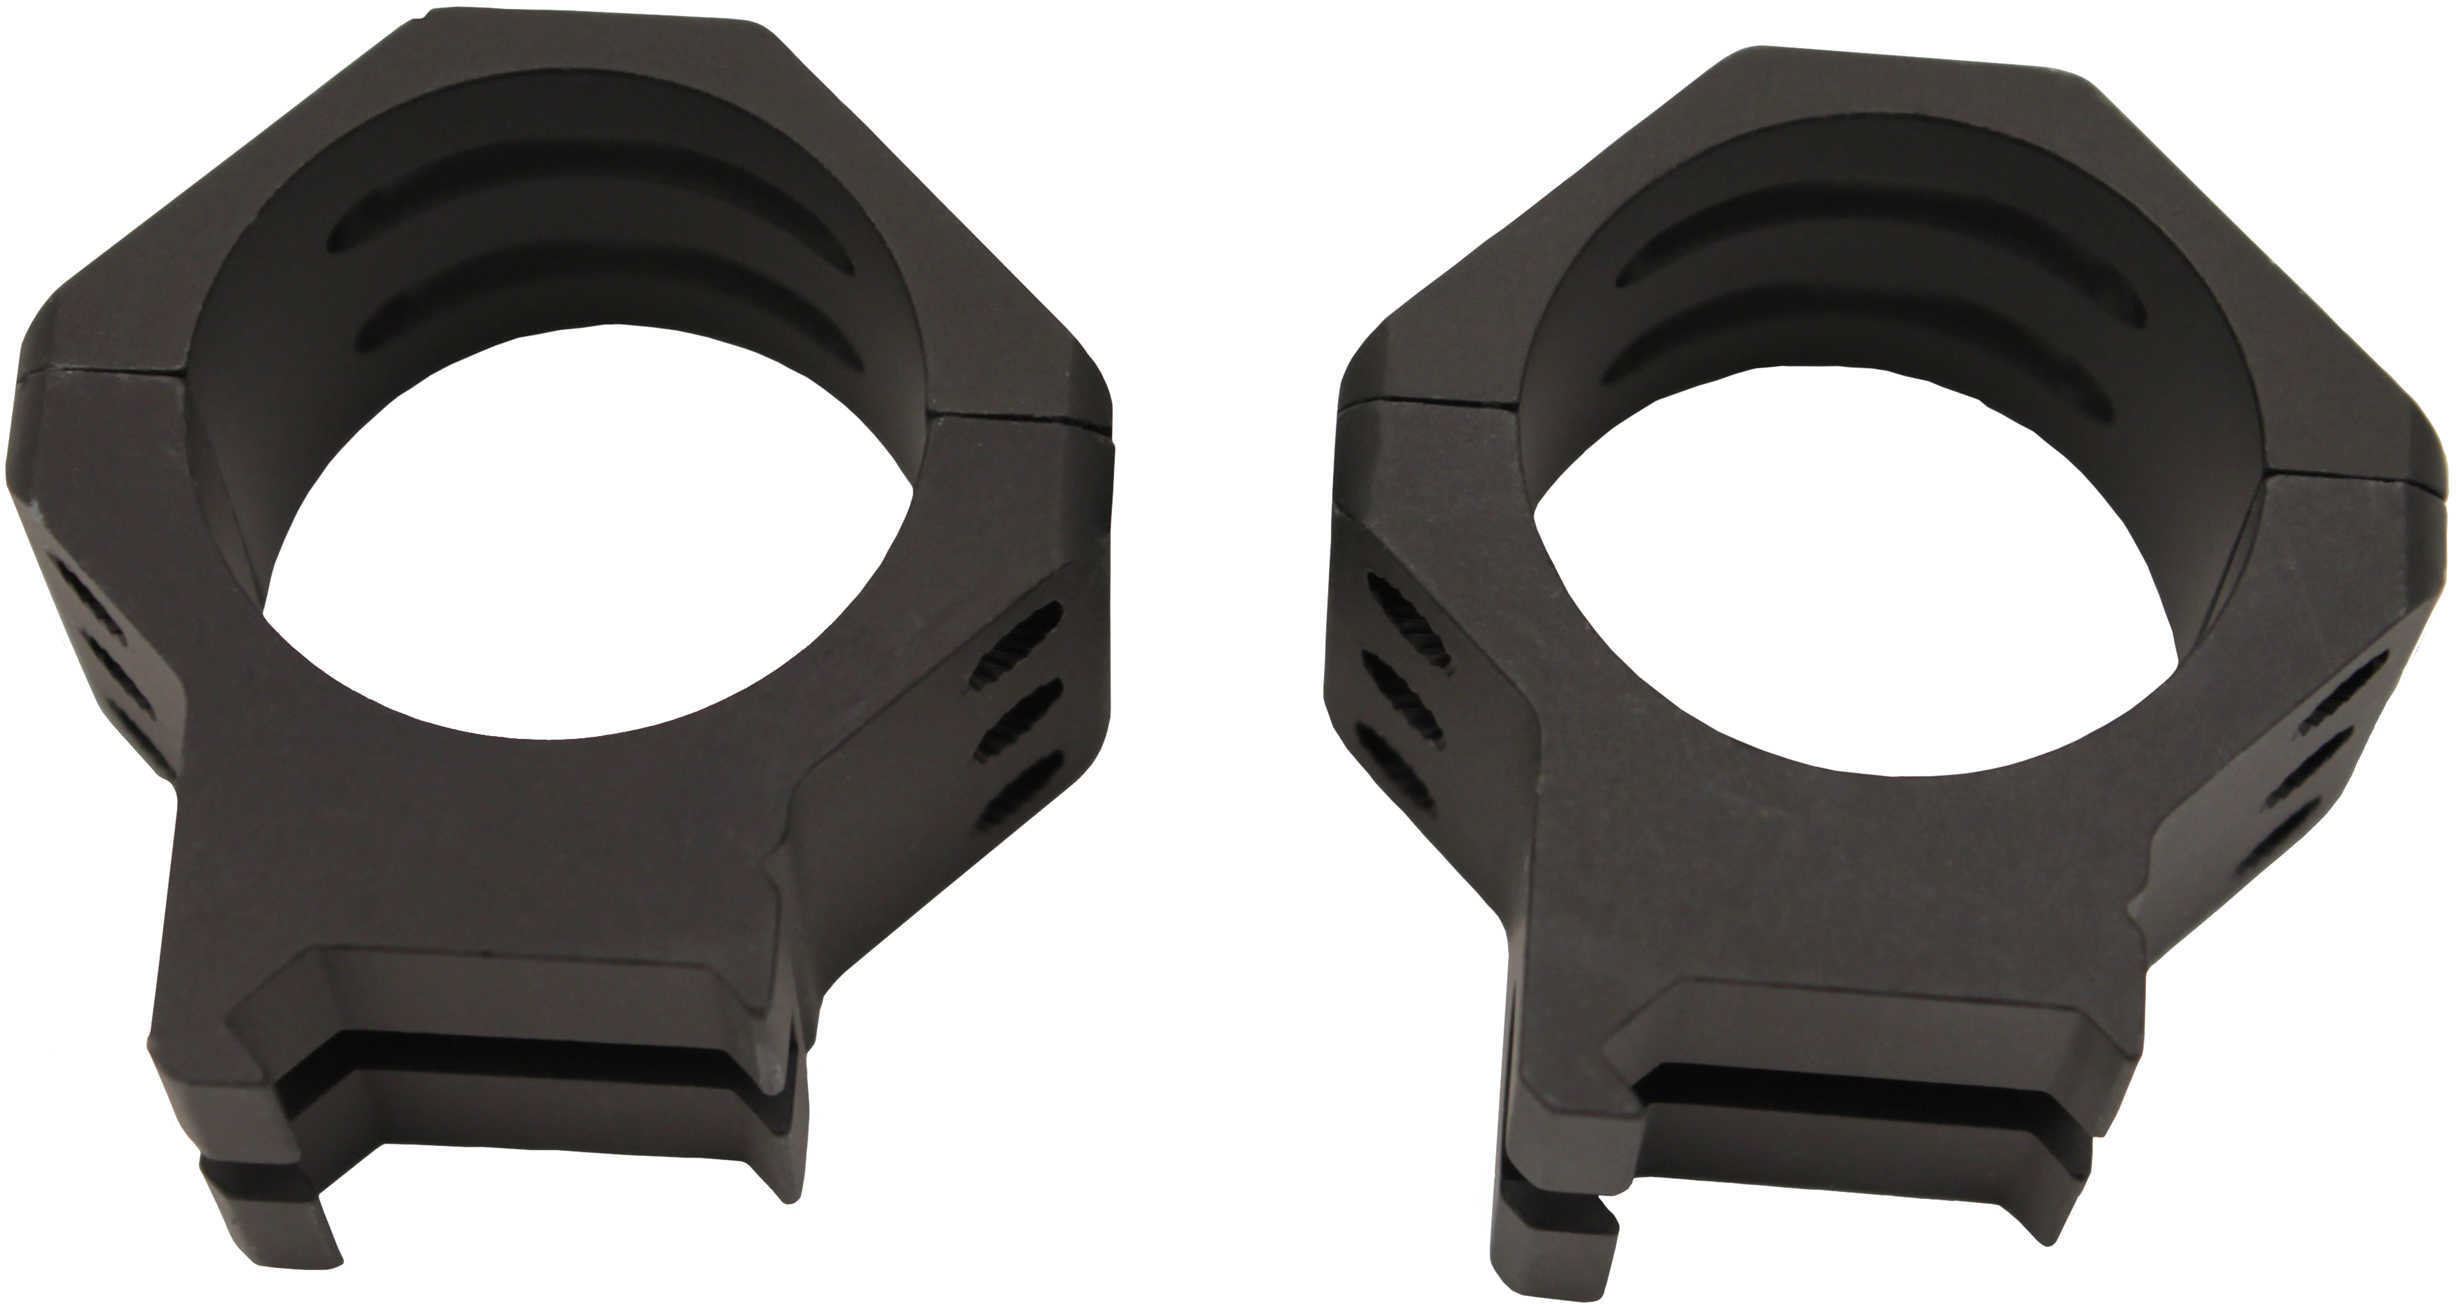 Weaver Tactical 6-Hole Picatinny Rings Med 30mm - Features the same six screws for maximum security and cla 99693